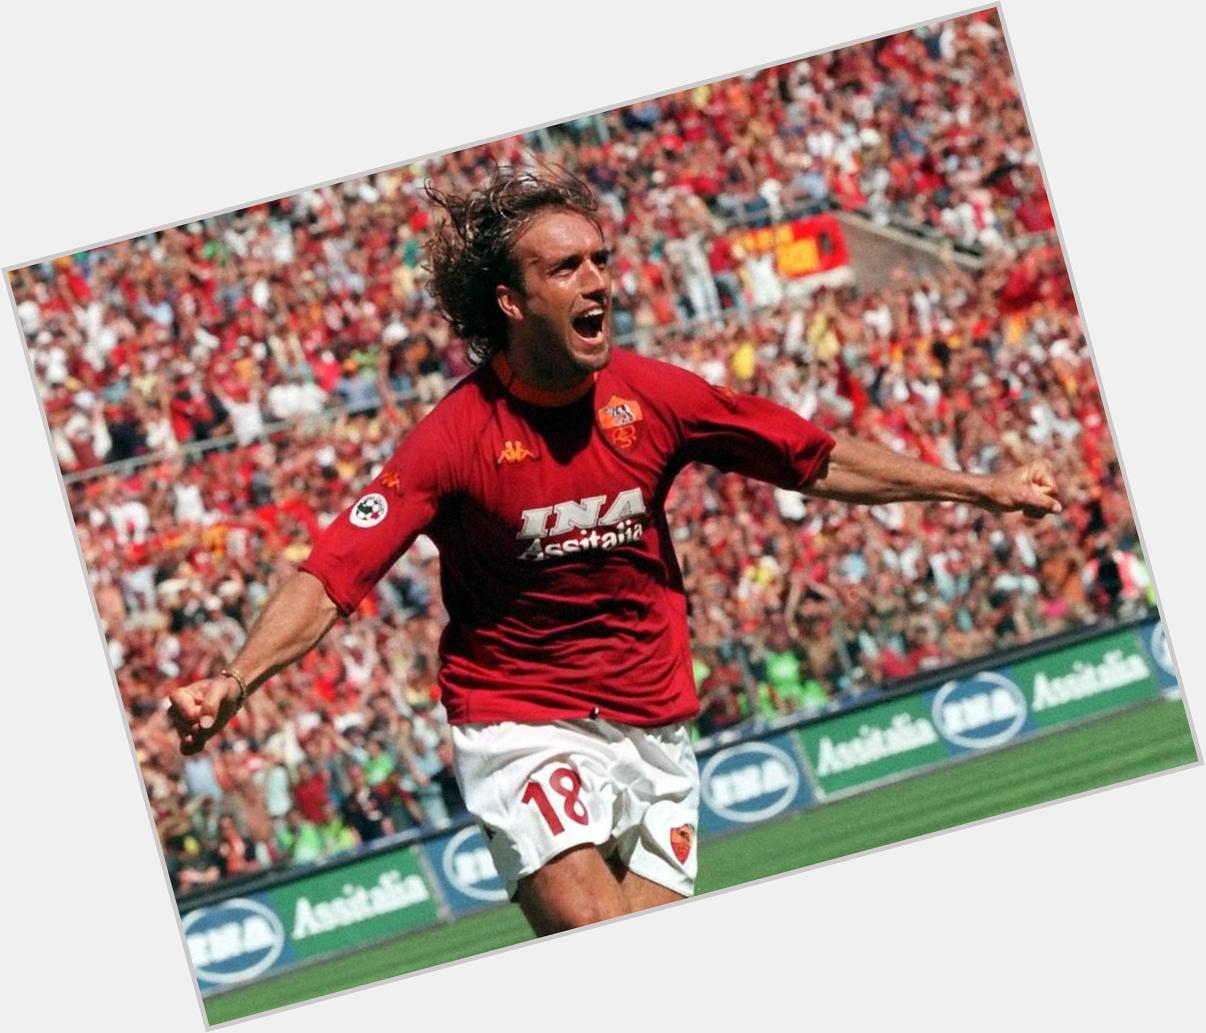 Happy 46th Birthday to Gabriel Batistuta! One of the best bombers I had privilege of watching for my team. Legend. 